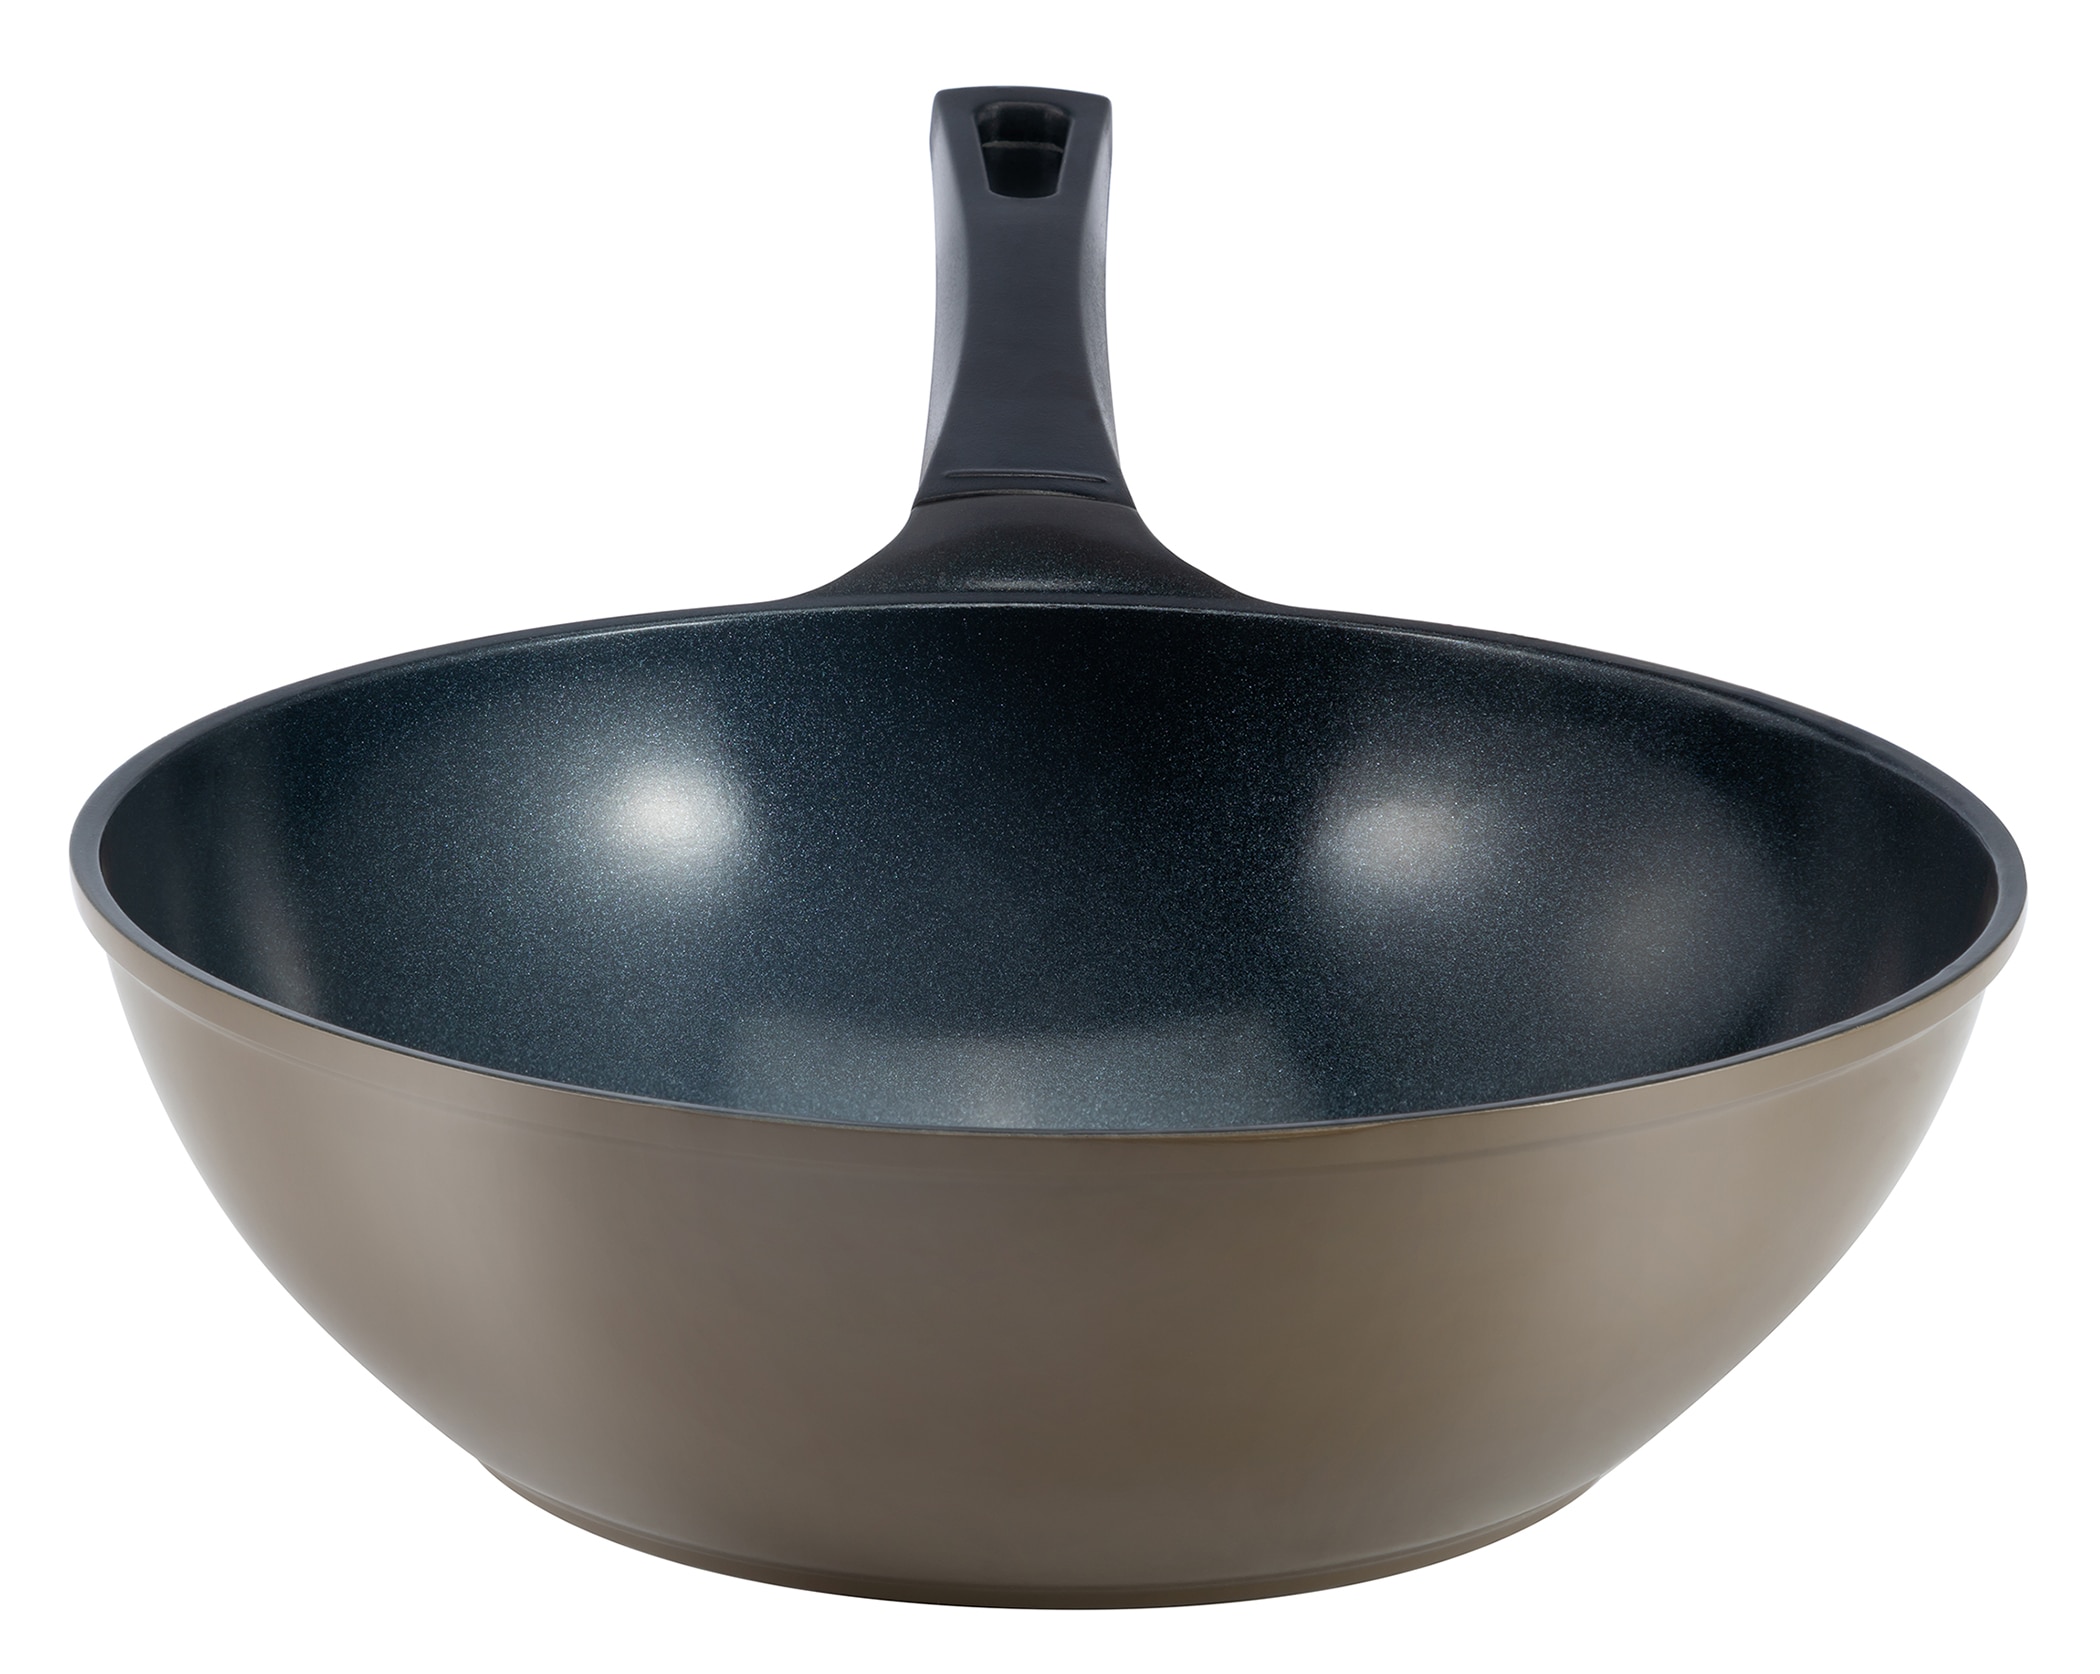 12 Green Ceramic Frying Pan by Ozeri, with Smooth Ceramic Non-Stick  Coating (100% PTFE and PFOA Free)